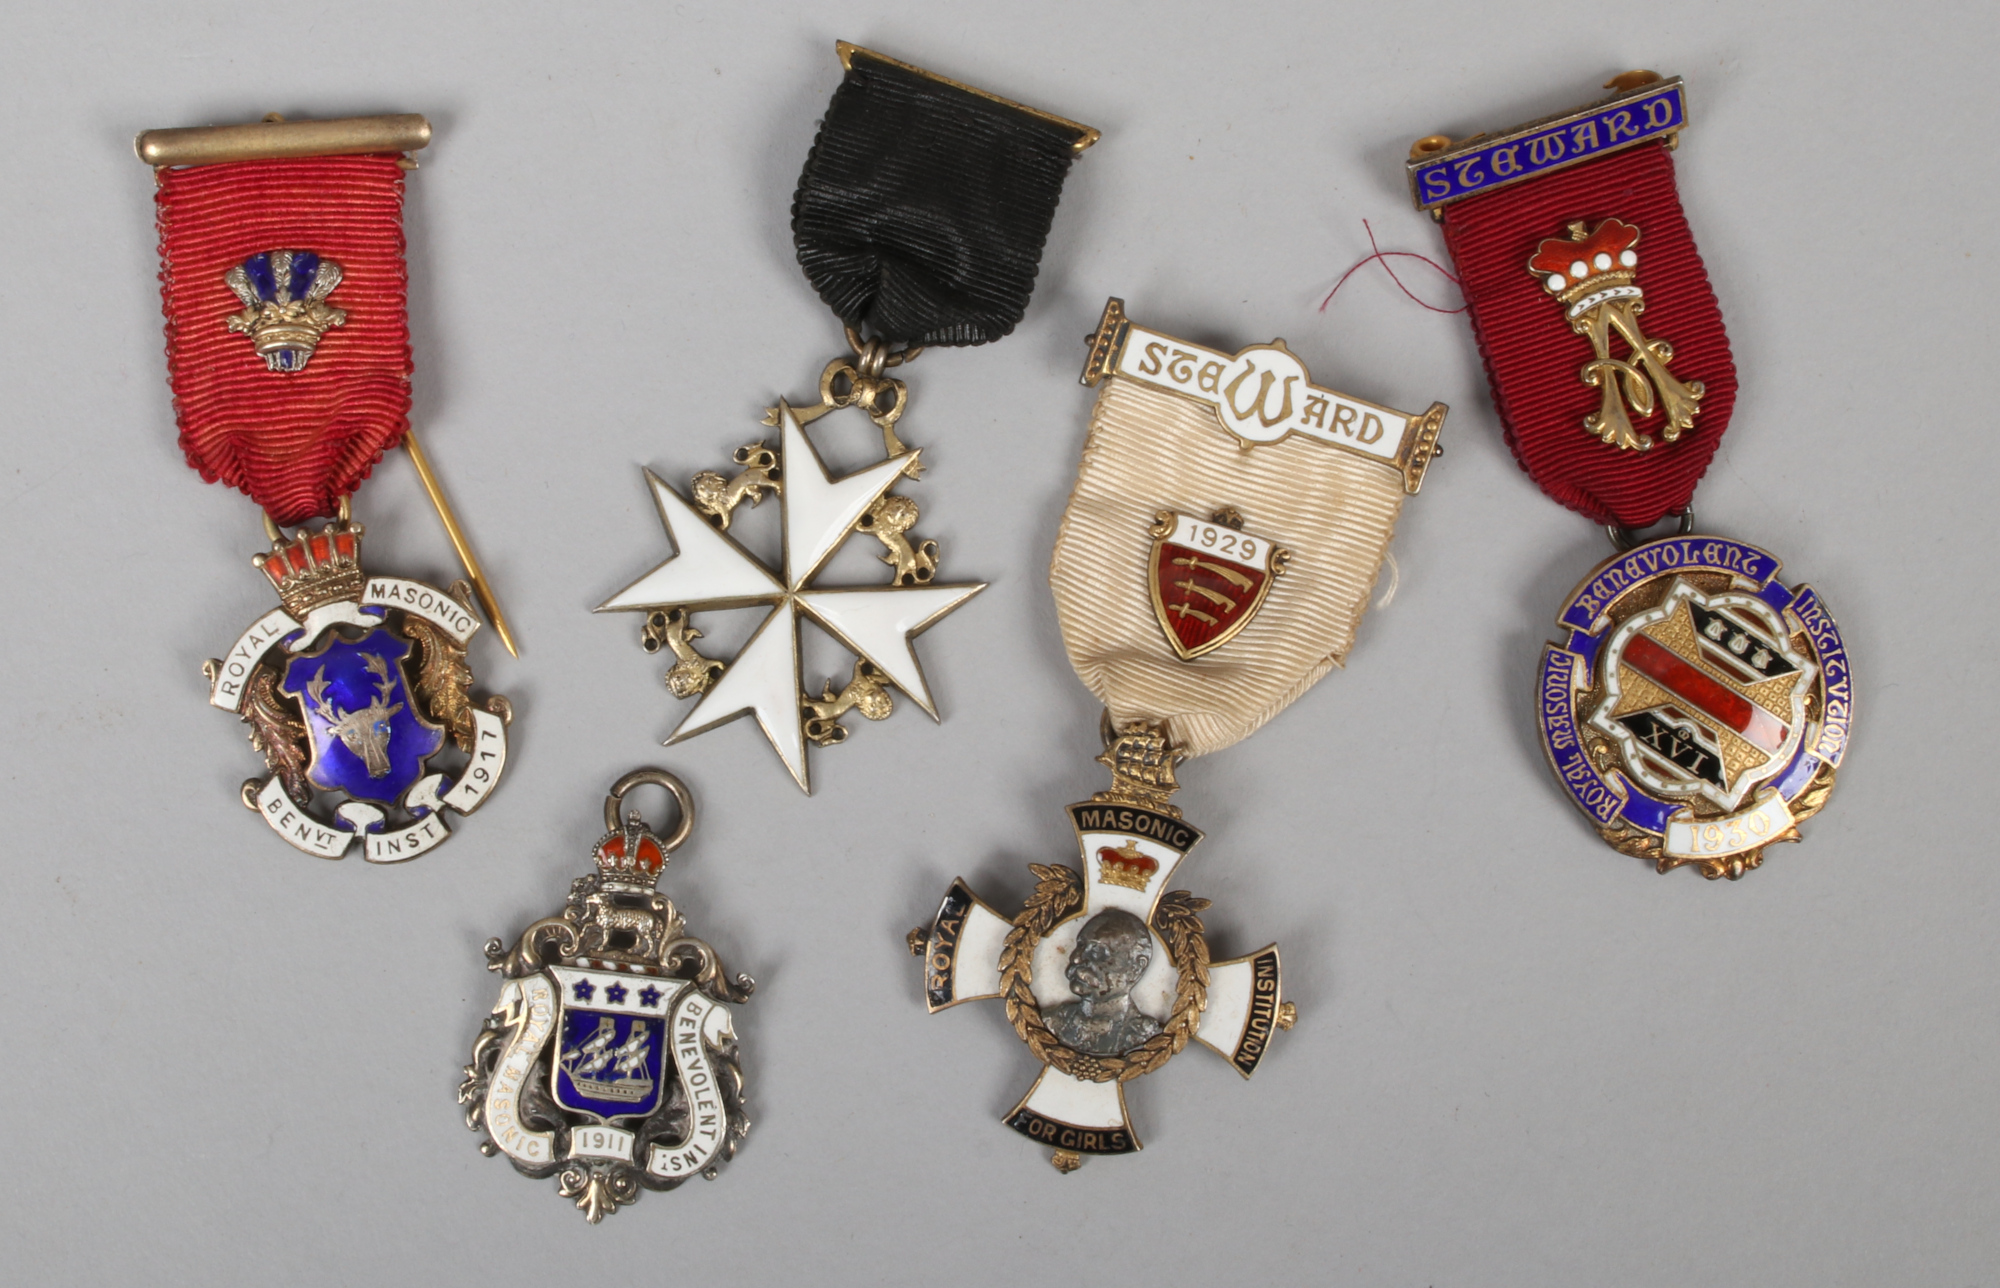 Five silver and enamel Masonic medals including four stewards jewels and a Knights of Malta jewel.